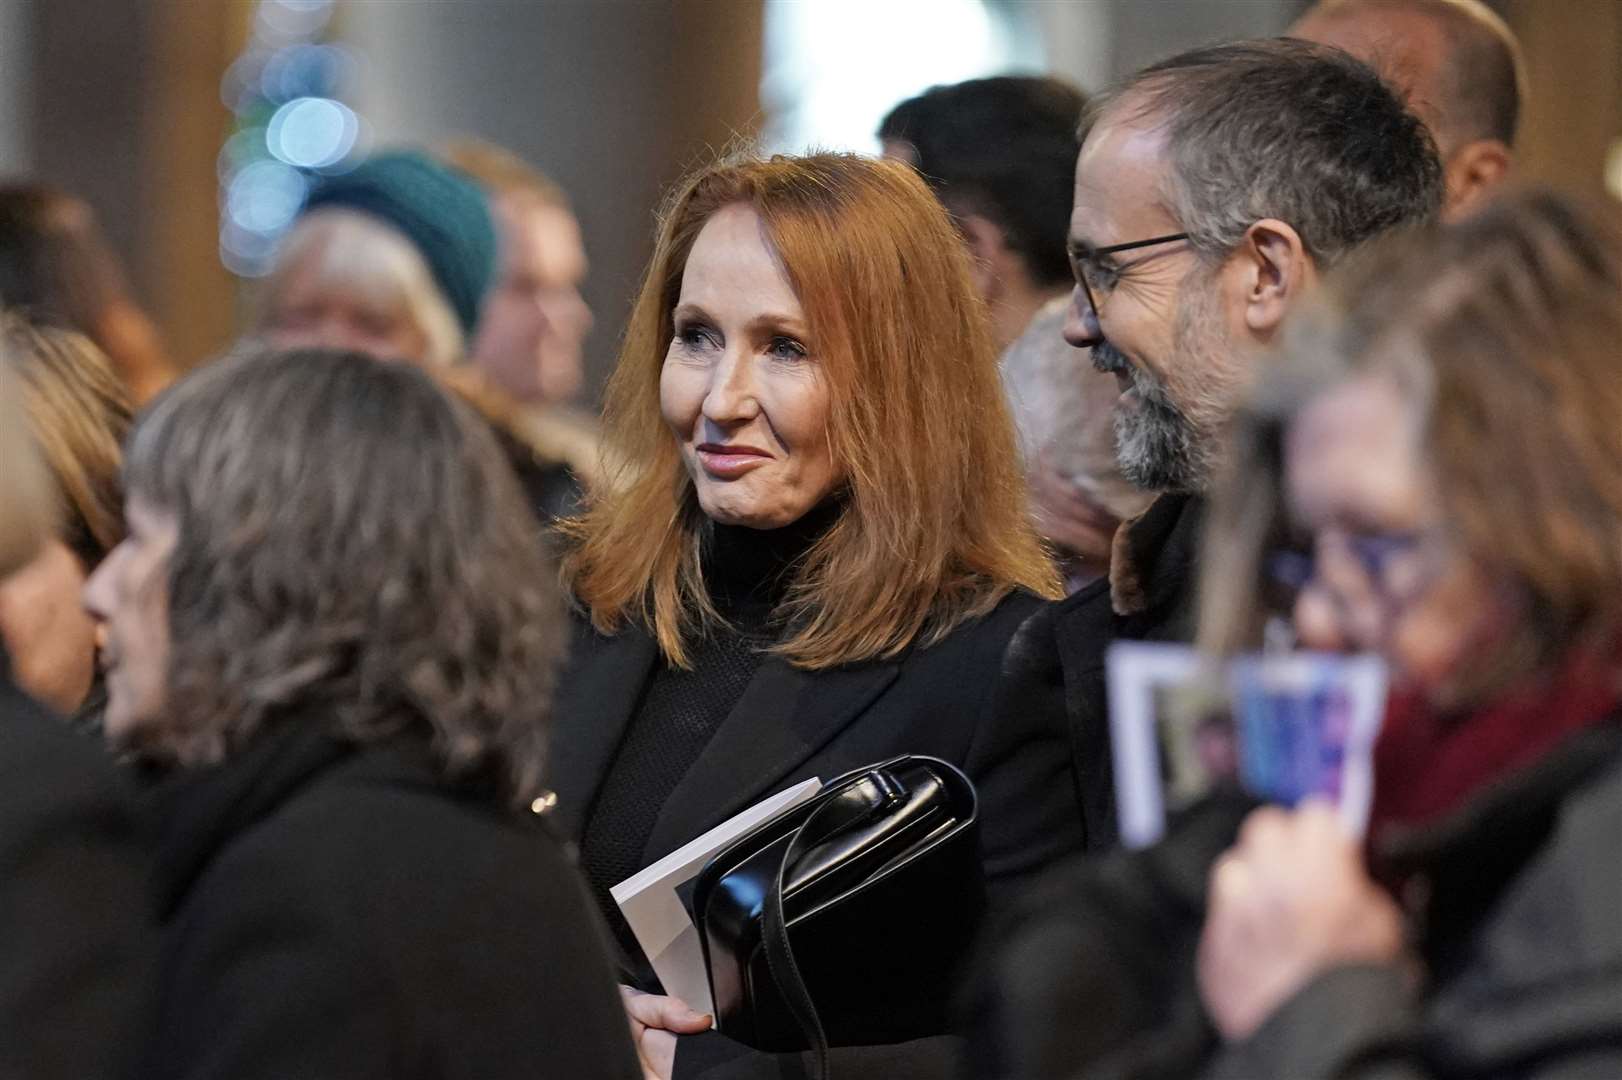 Author JK Rowling was among the congregation at the service (Andrew Milligan/PA)